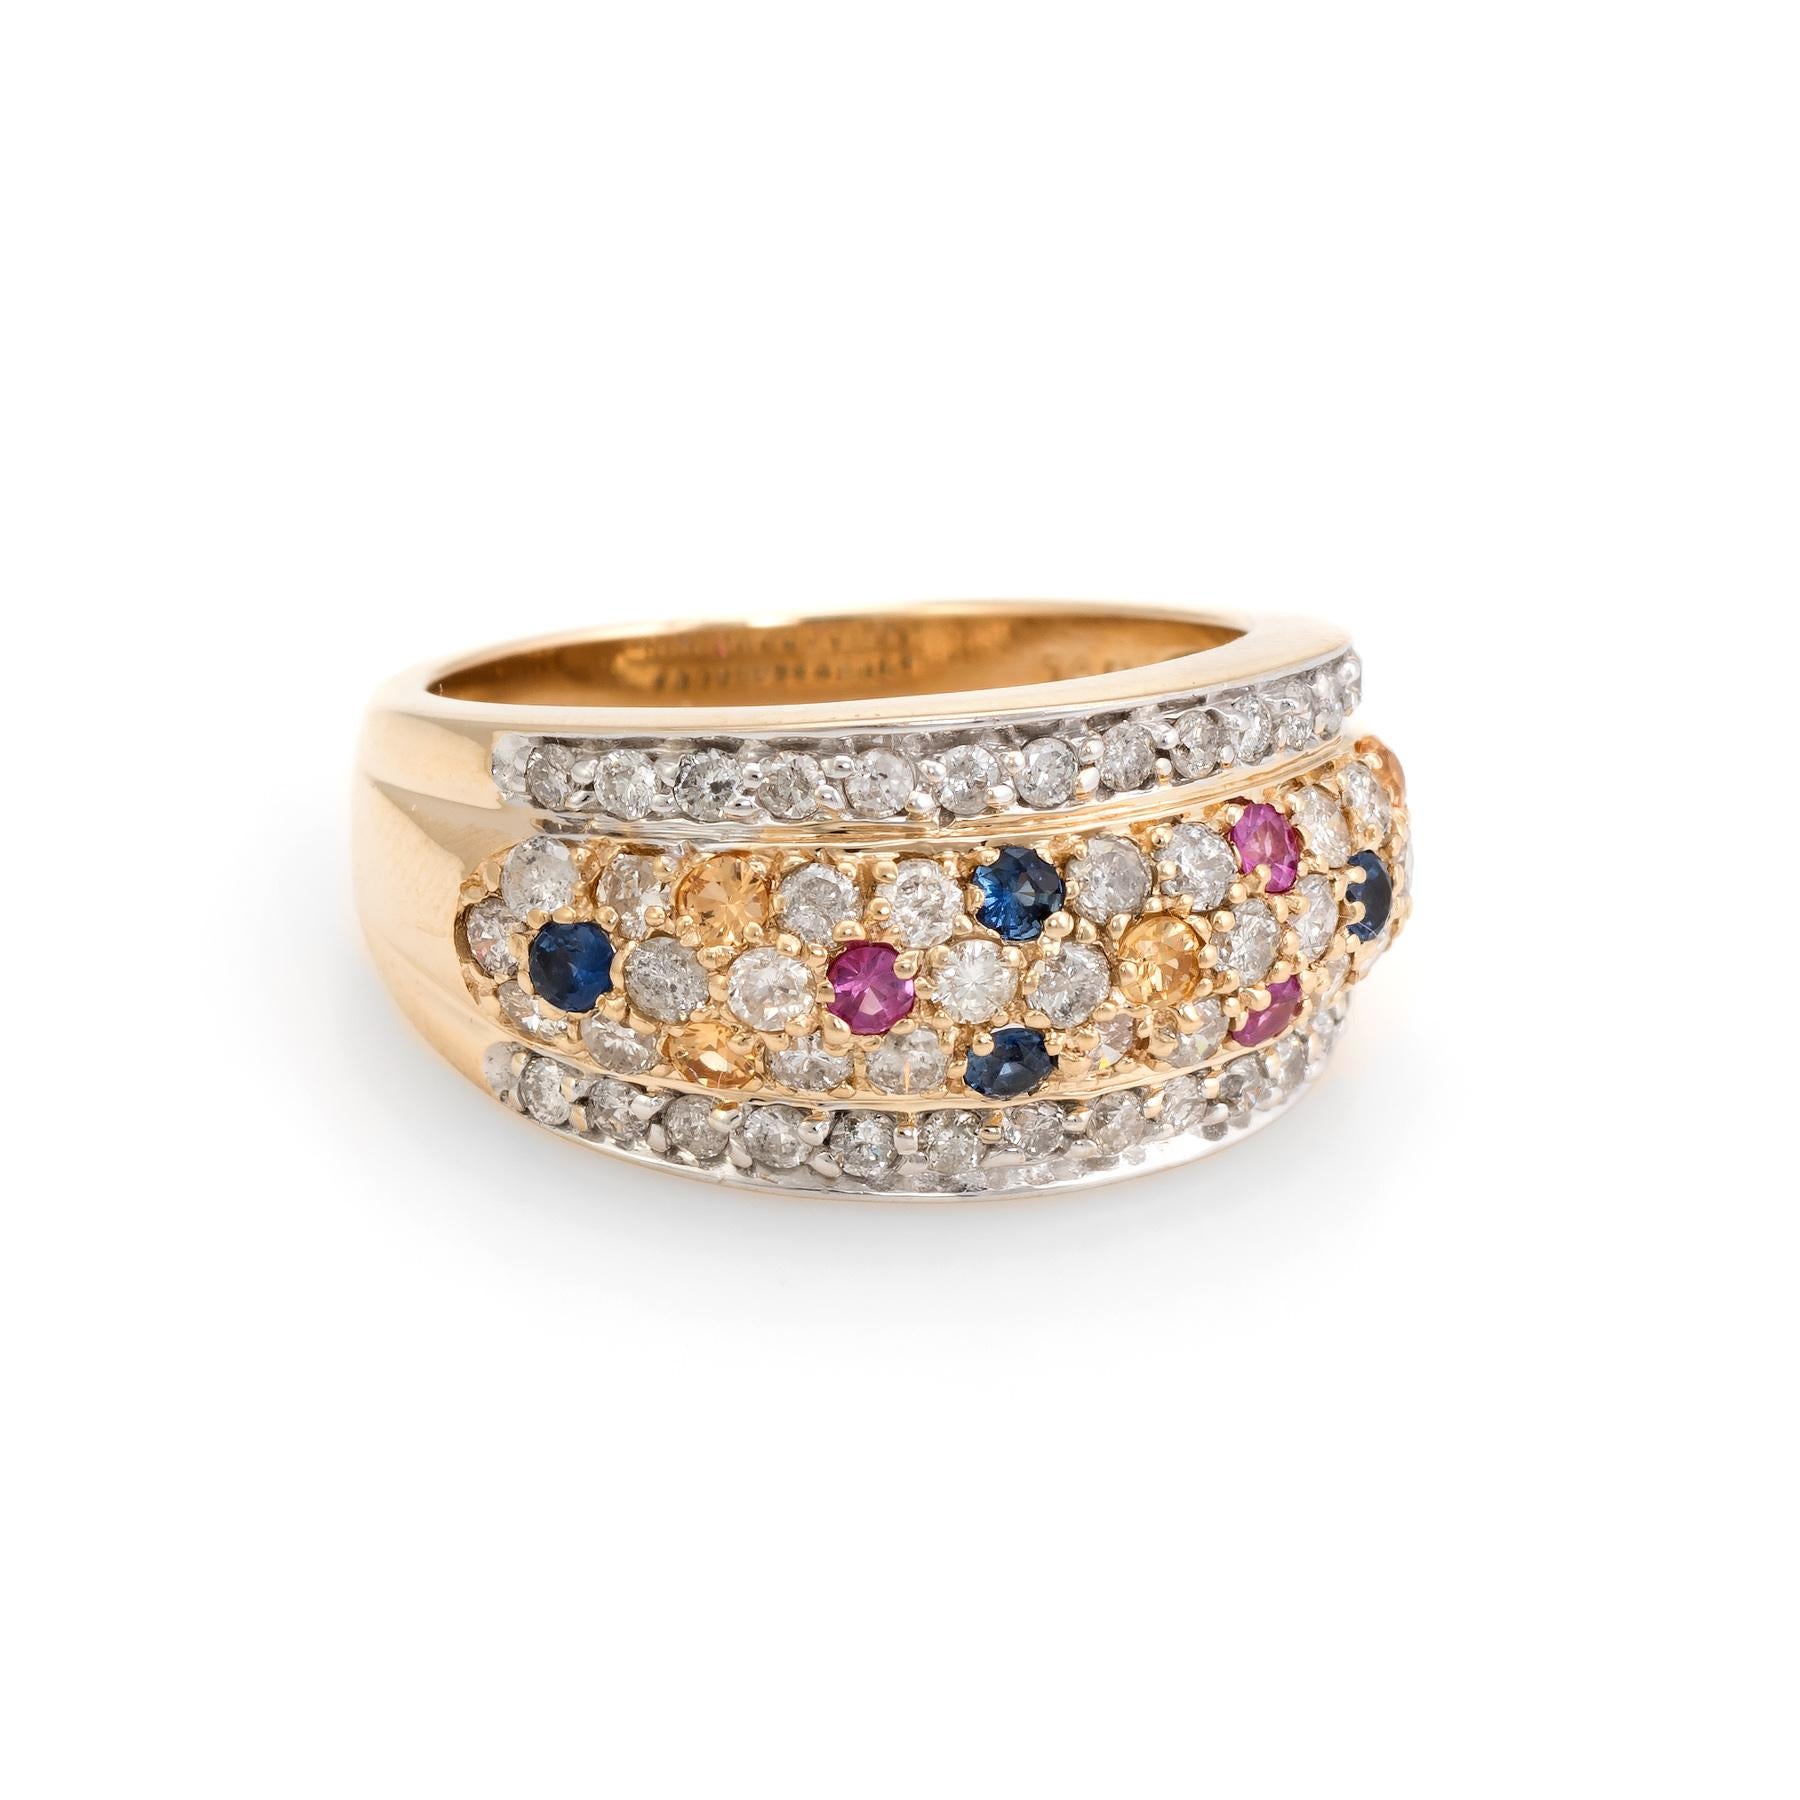 Striking vintage band, crafted in 14 karat yellow gold. 

Diamonds are pave set into the mount and total an estimated 0.76 carats (estimated at H-I color and SI1-I1 clarity). The colored sapphires (pink, blue and yellow) total an estimated 0.20